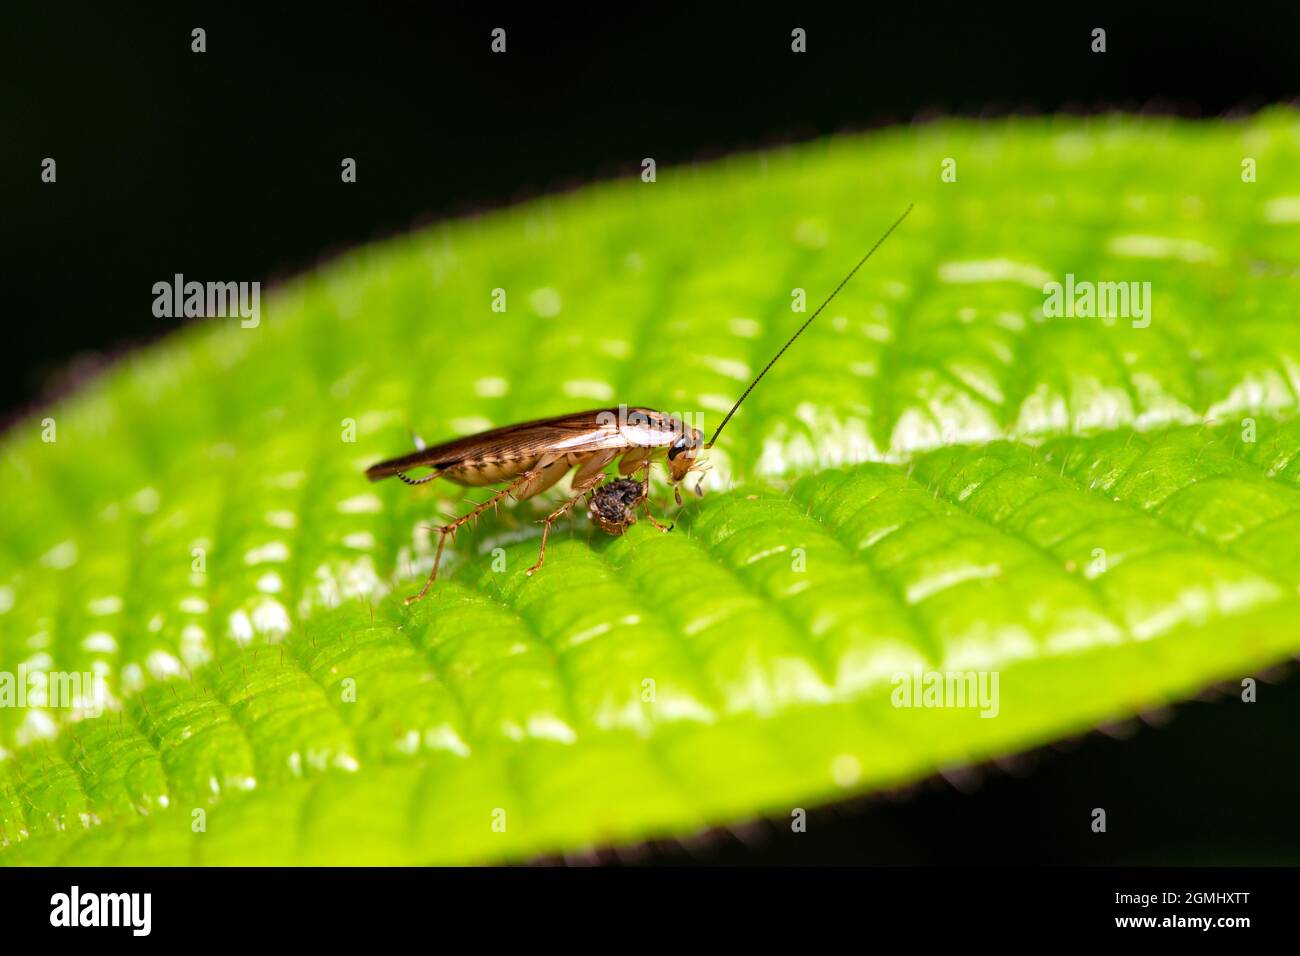 Ectobius sylvestris ( forest cockroach) on leaf Stock Photo